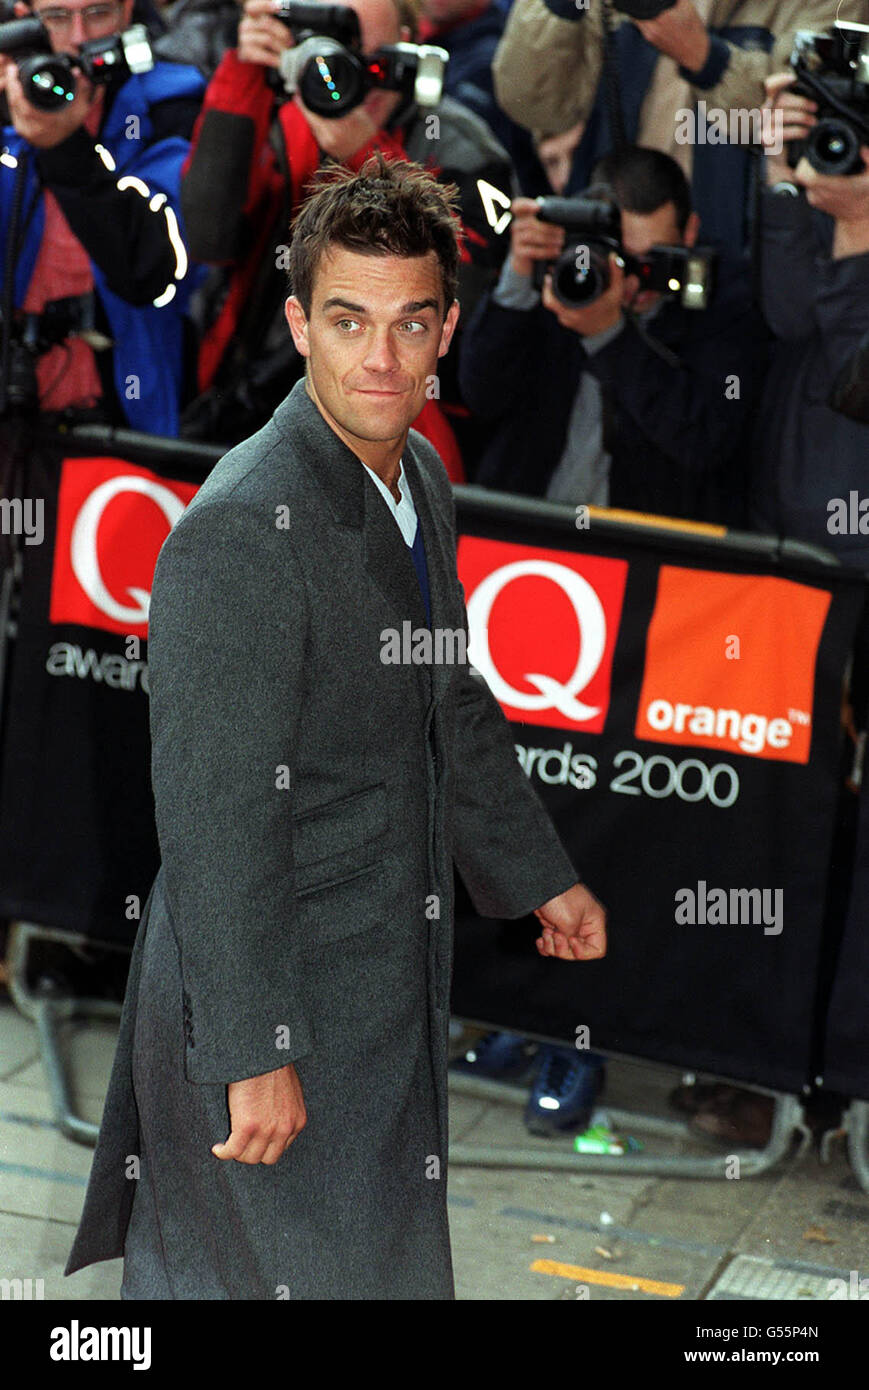 Singer Robbie Williams arrives at the Park Lane Hotel, central London, for the Q Awards. The event, sponsored by music magazine Q, is one of the highlights of the music industry's year. * 1/12/2000: Pop idol Robbie Williams will shatter a wall of silence surrounding Aids by symbolically using a 50-tonne crane to smash through a wall. The Rock DJ singer will be in the driving seat to direct a wrecking ball through the barrier at a building site in London for children's charity Unicef. Stock Photo